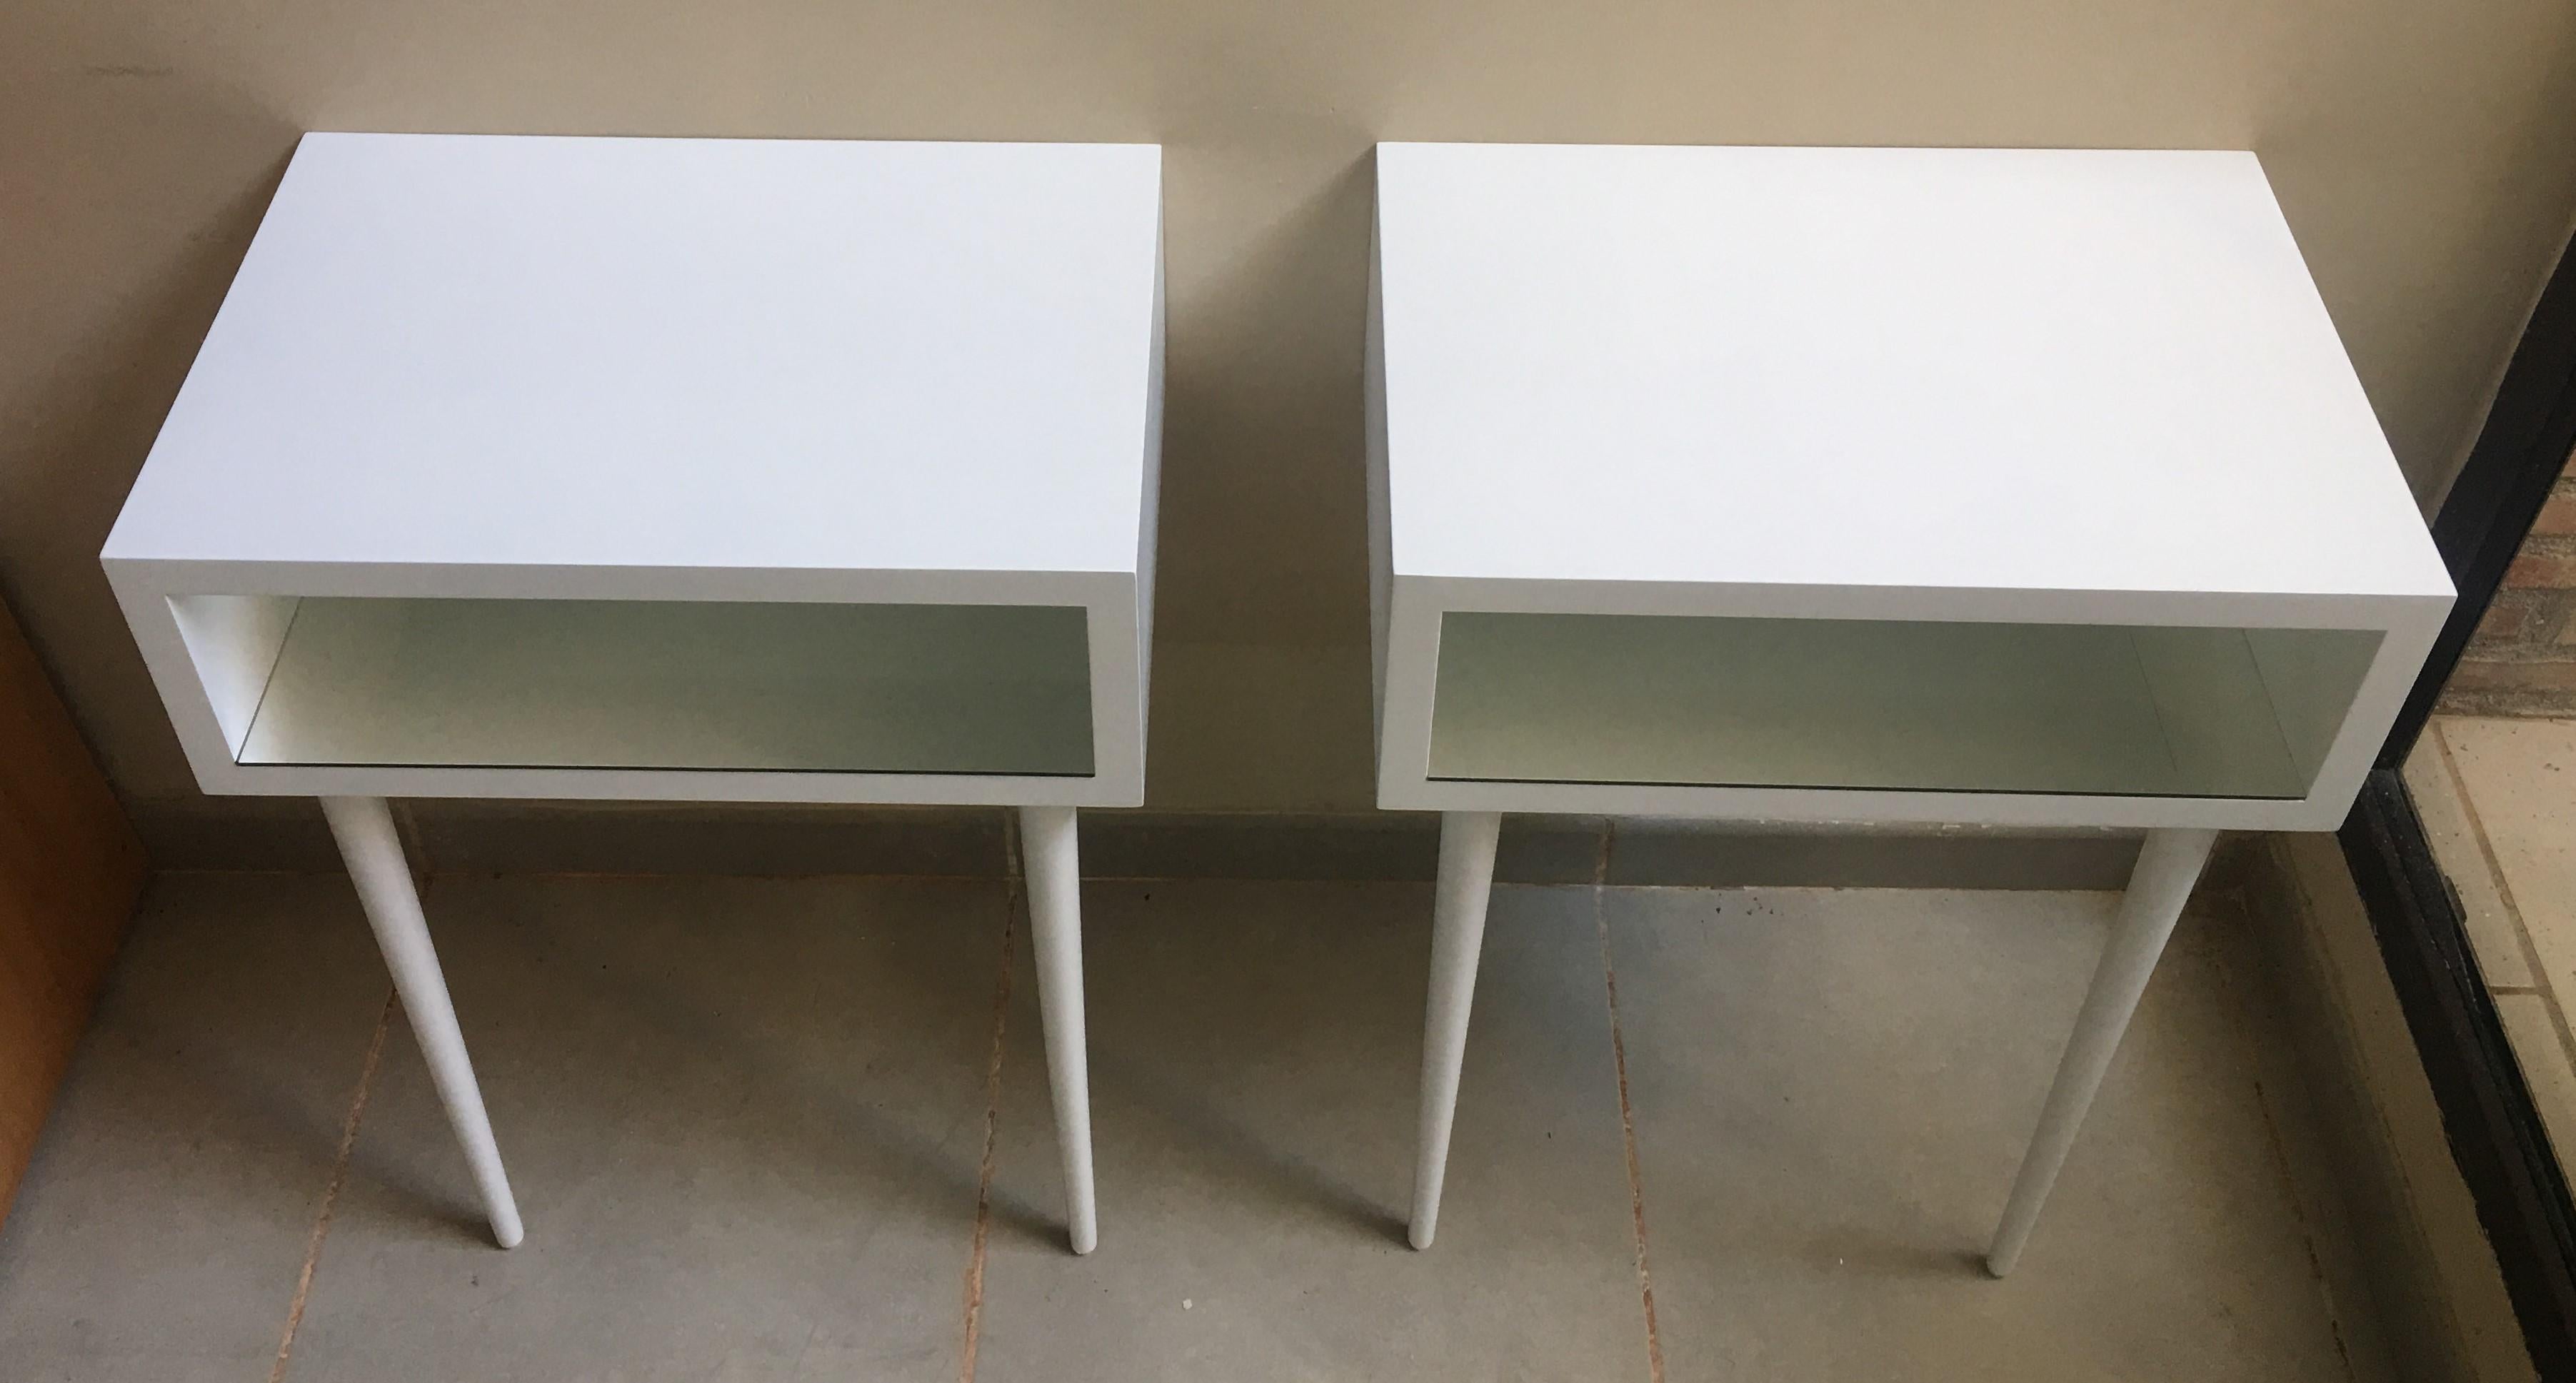 Mirror 20th Century Danish Midcentury White Modern-Style Nightstands, a Pair For Sale